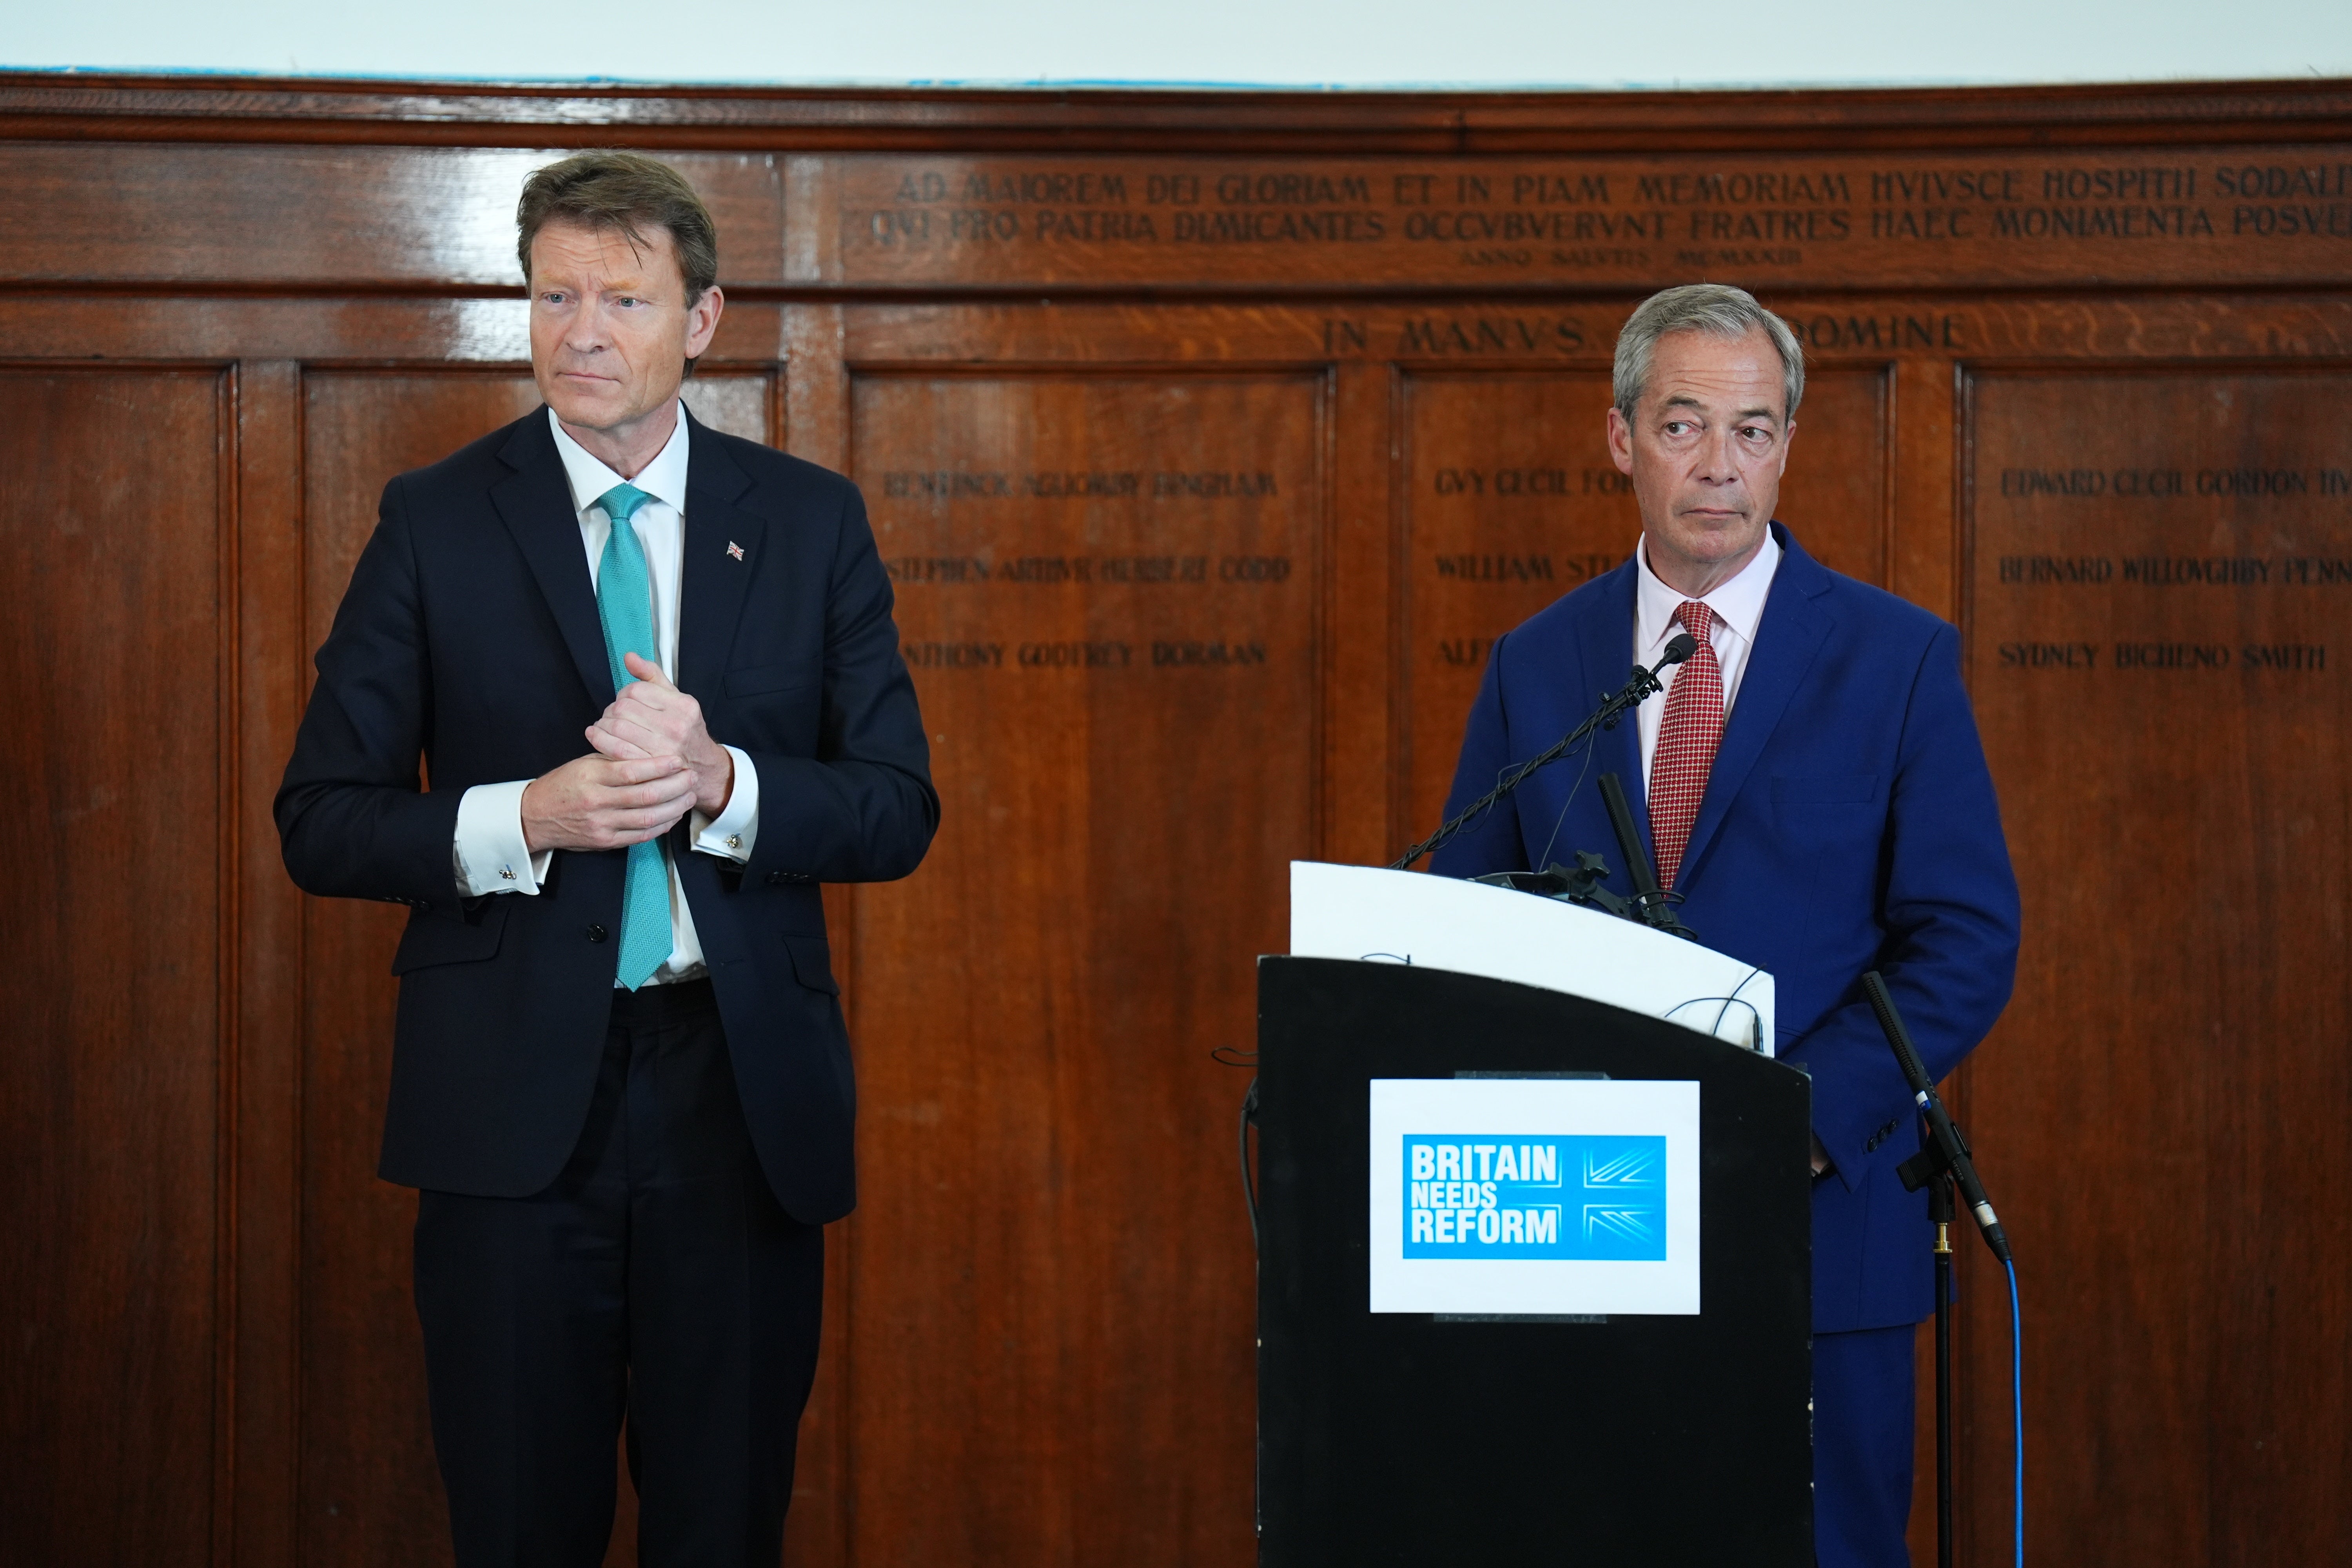 Reform UK leader Nigel Farage speaks to the media during a press conference at The Wellington, central London, while on the General Election campaign trail